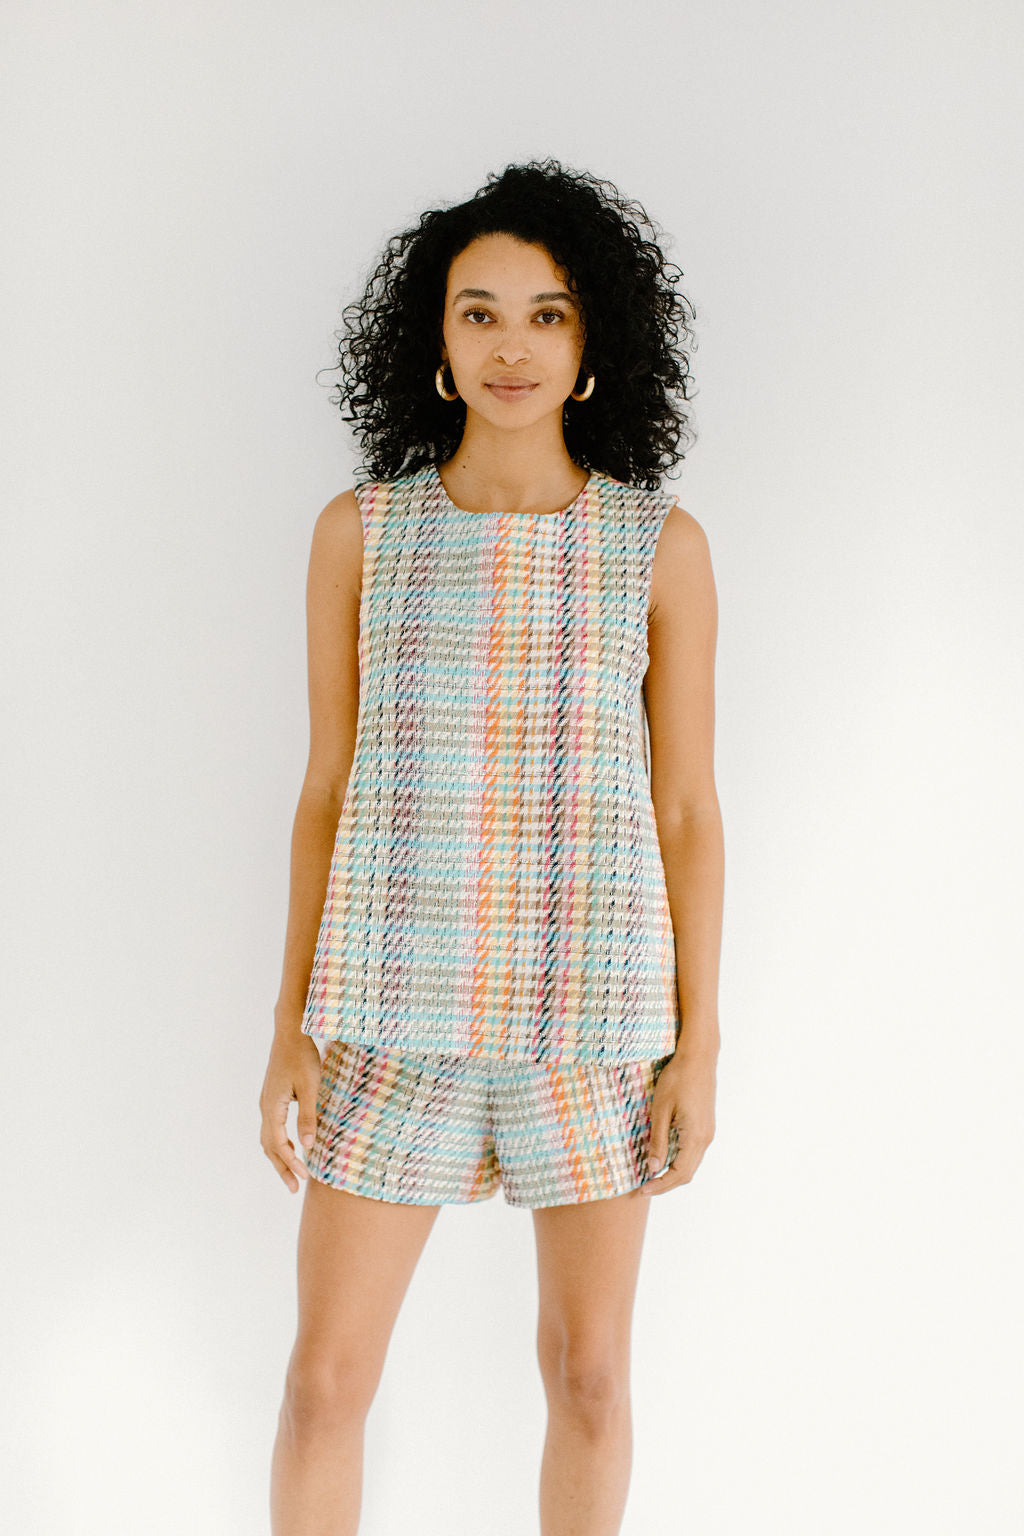 A woman with olive skin and short, curly black hair staring directly at the camera. She's wearing gold hoop earrings and a matching wide cut tank top and shorts in a colorful plaid pattern.